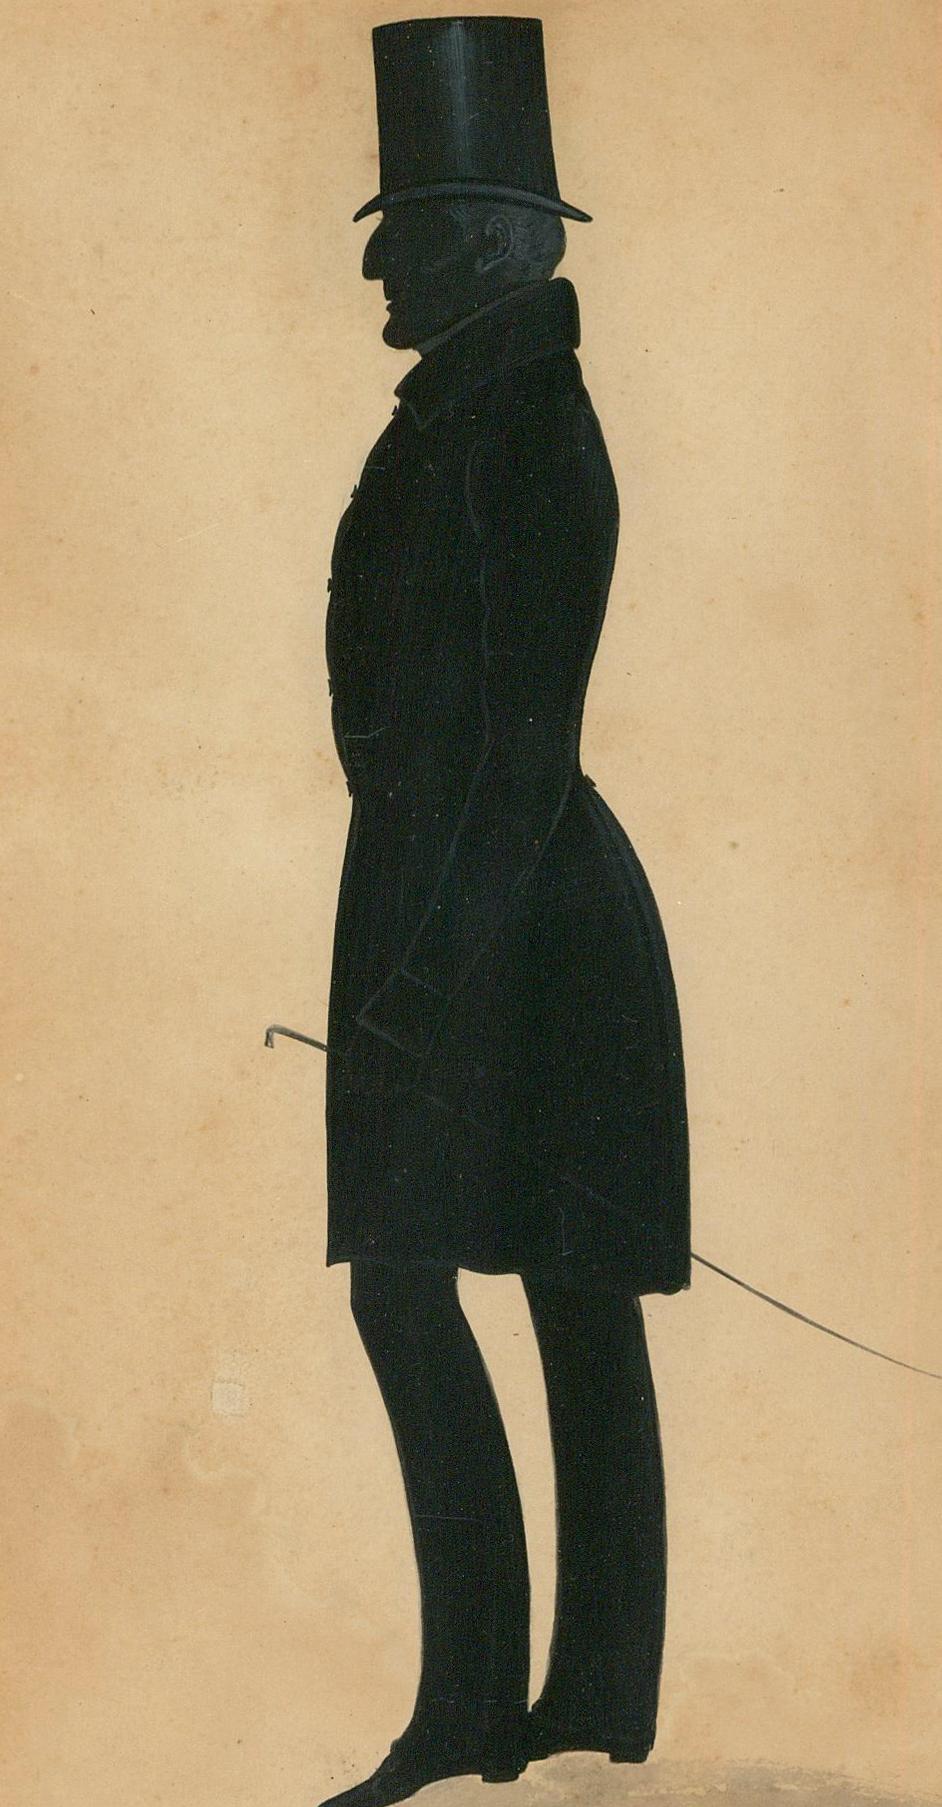 Full-Length 19th Century India Ink Silhouette - Victorian Gentleman in Profile - Art by Unknown